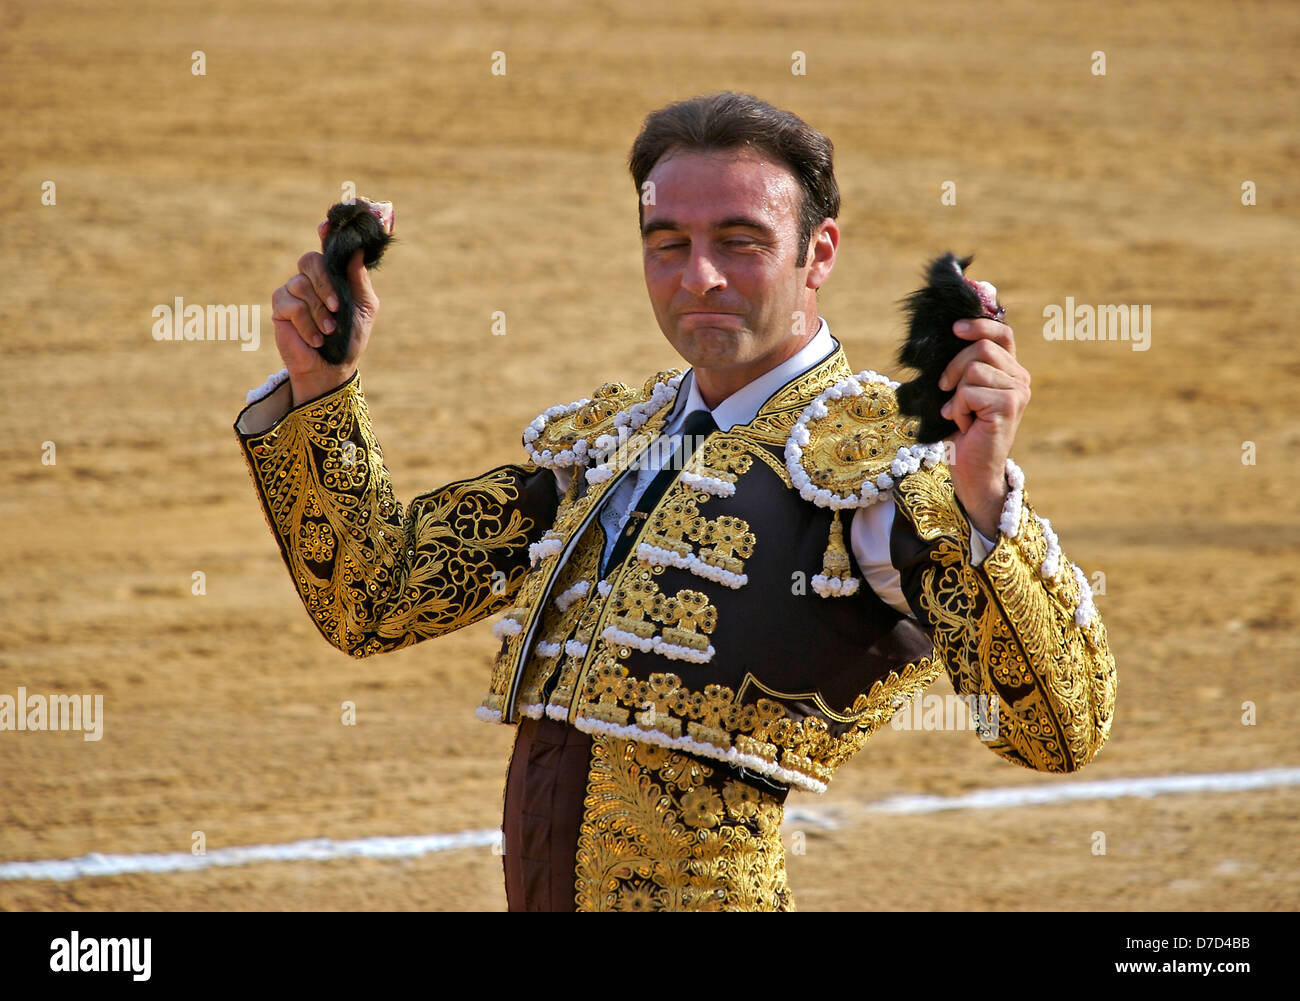 Matador Manuel Ponce awarded two ears during a bullfight in Fuengirola, Costa del Sol, Spain. Stock Photo